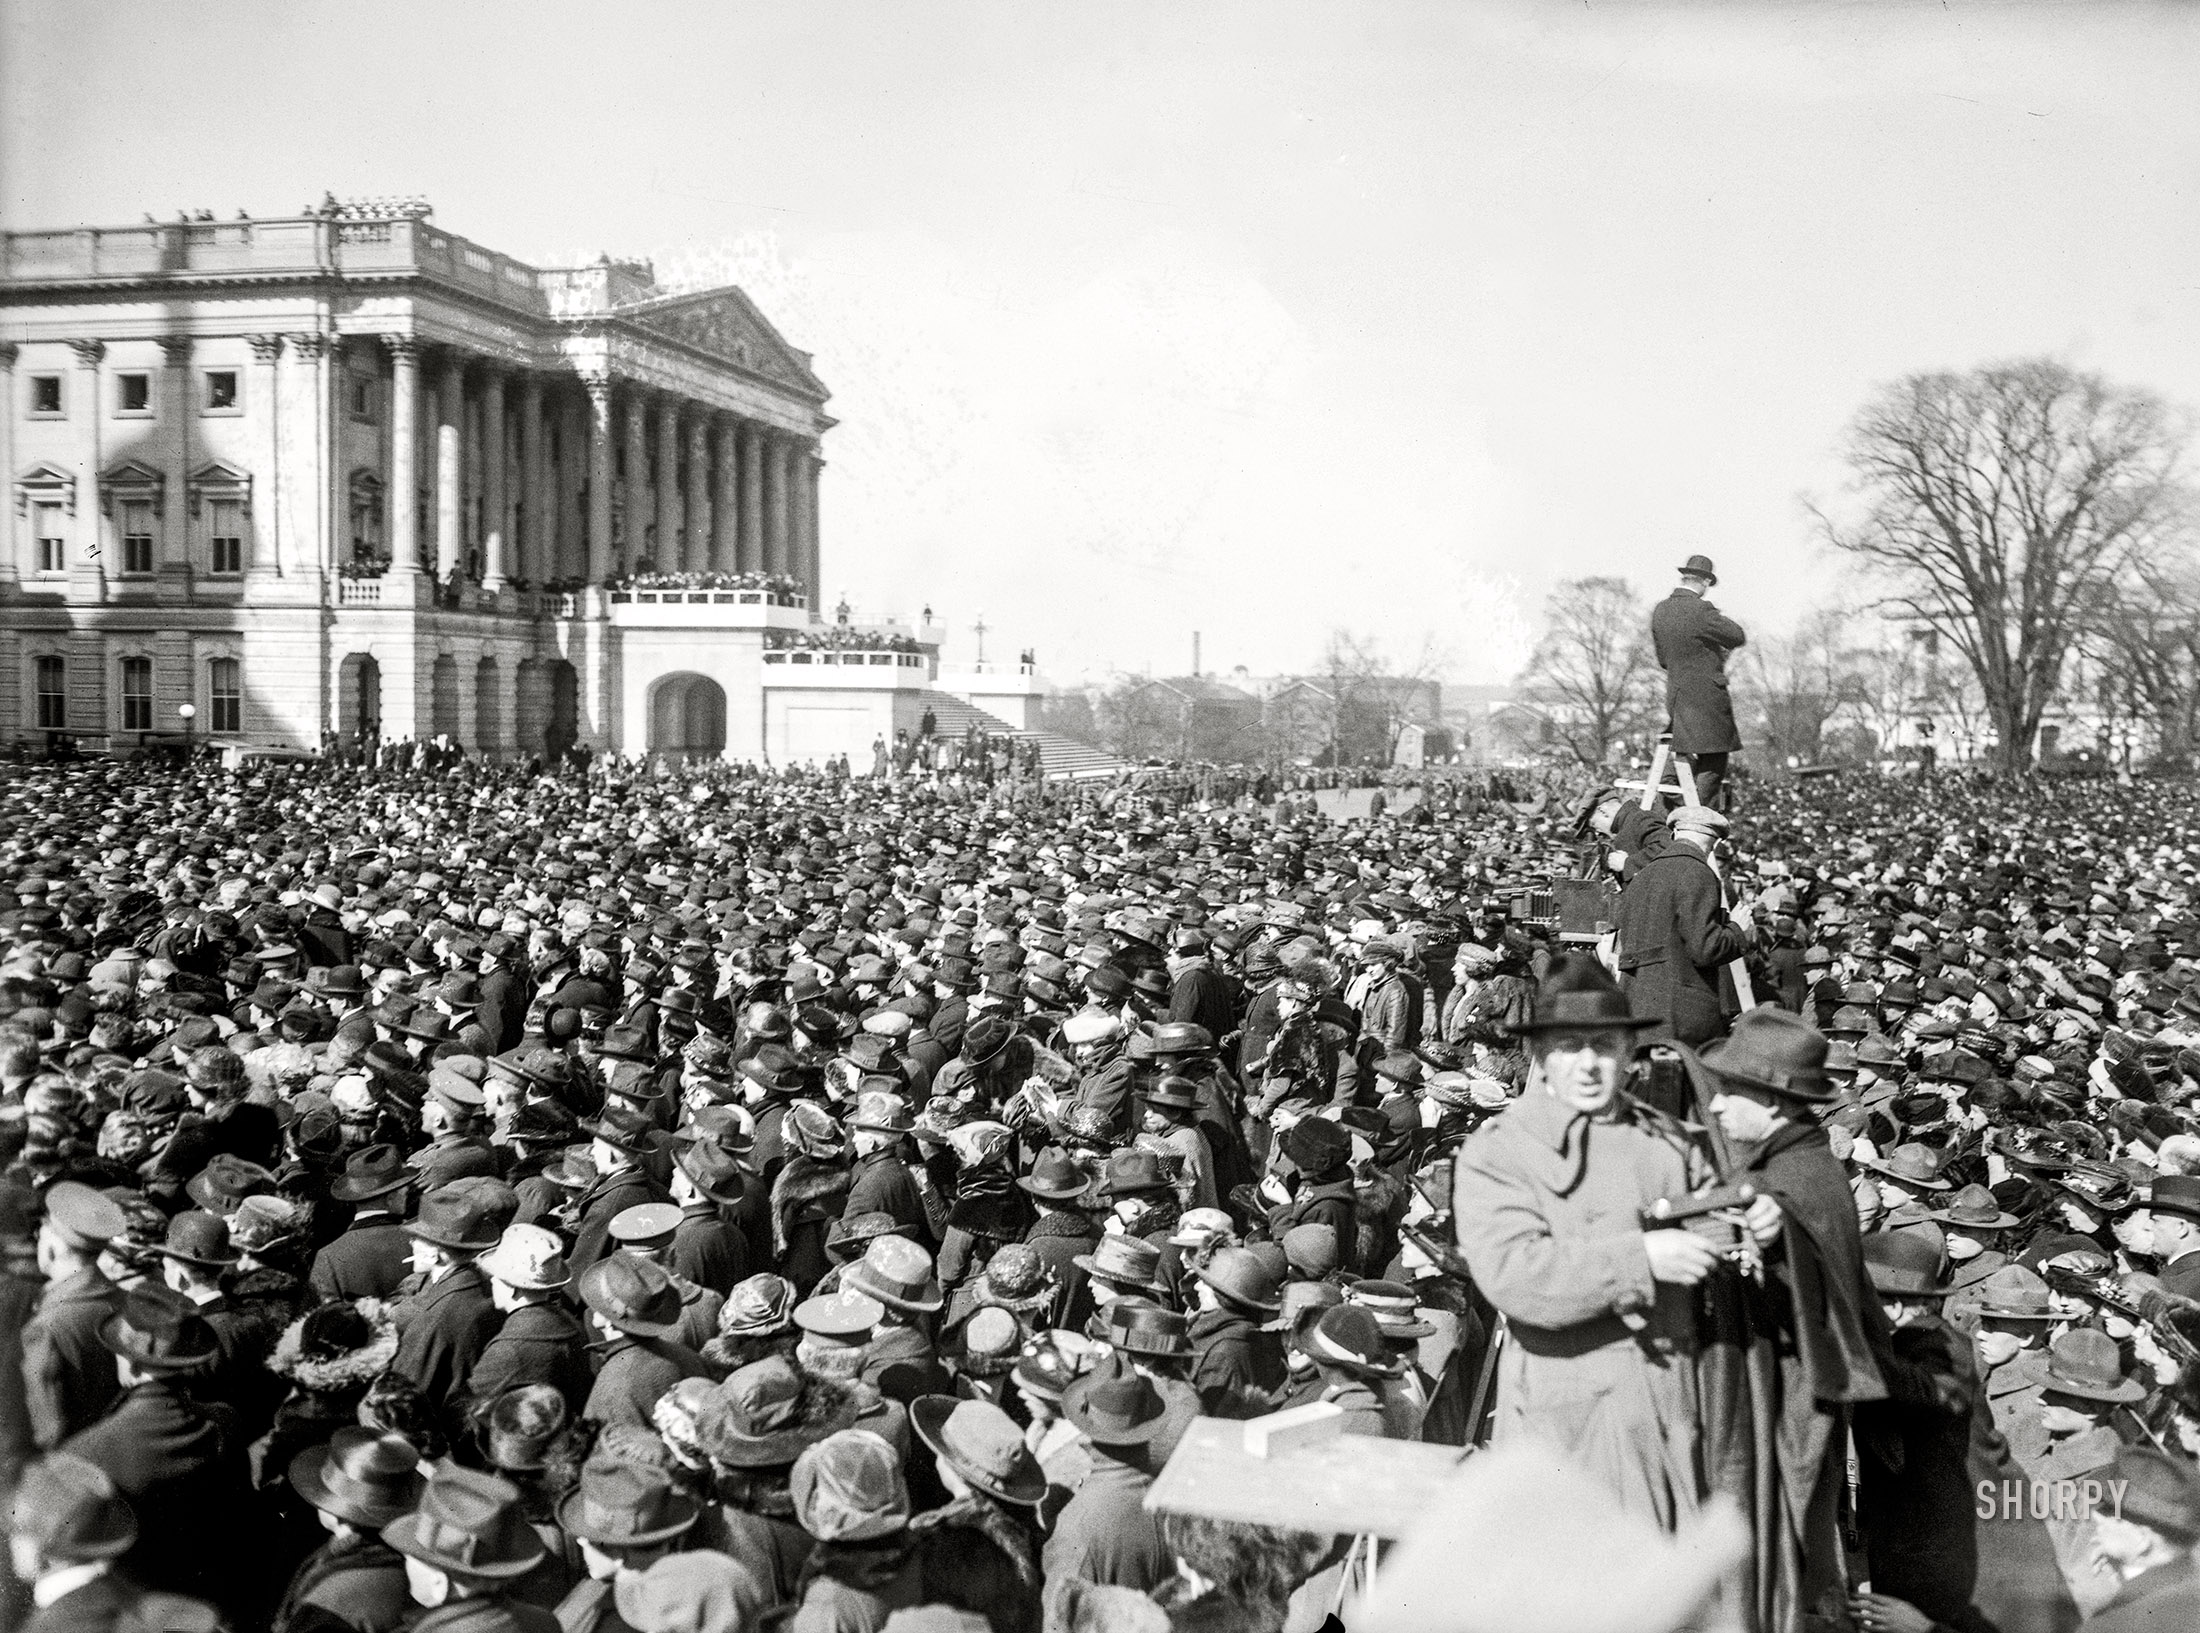 "Inauguration. March 4, 1921. Crowds at U.S. Capitol." National Photo Company Collection glass negative. View full size.